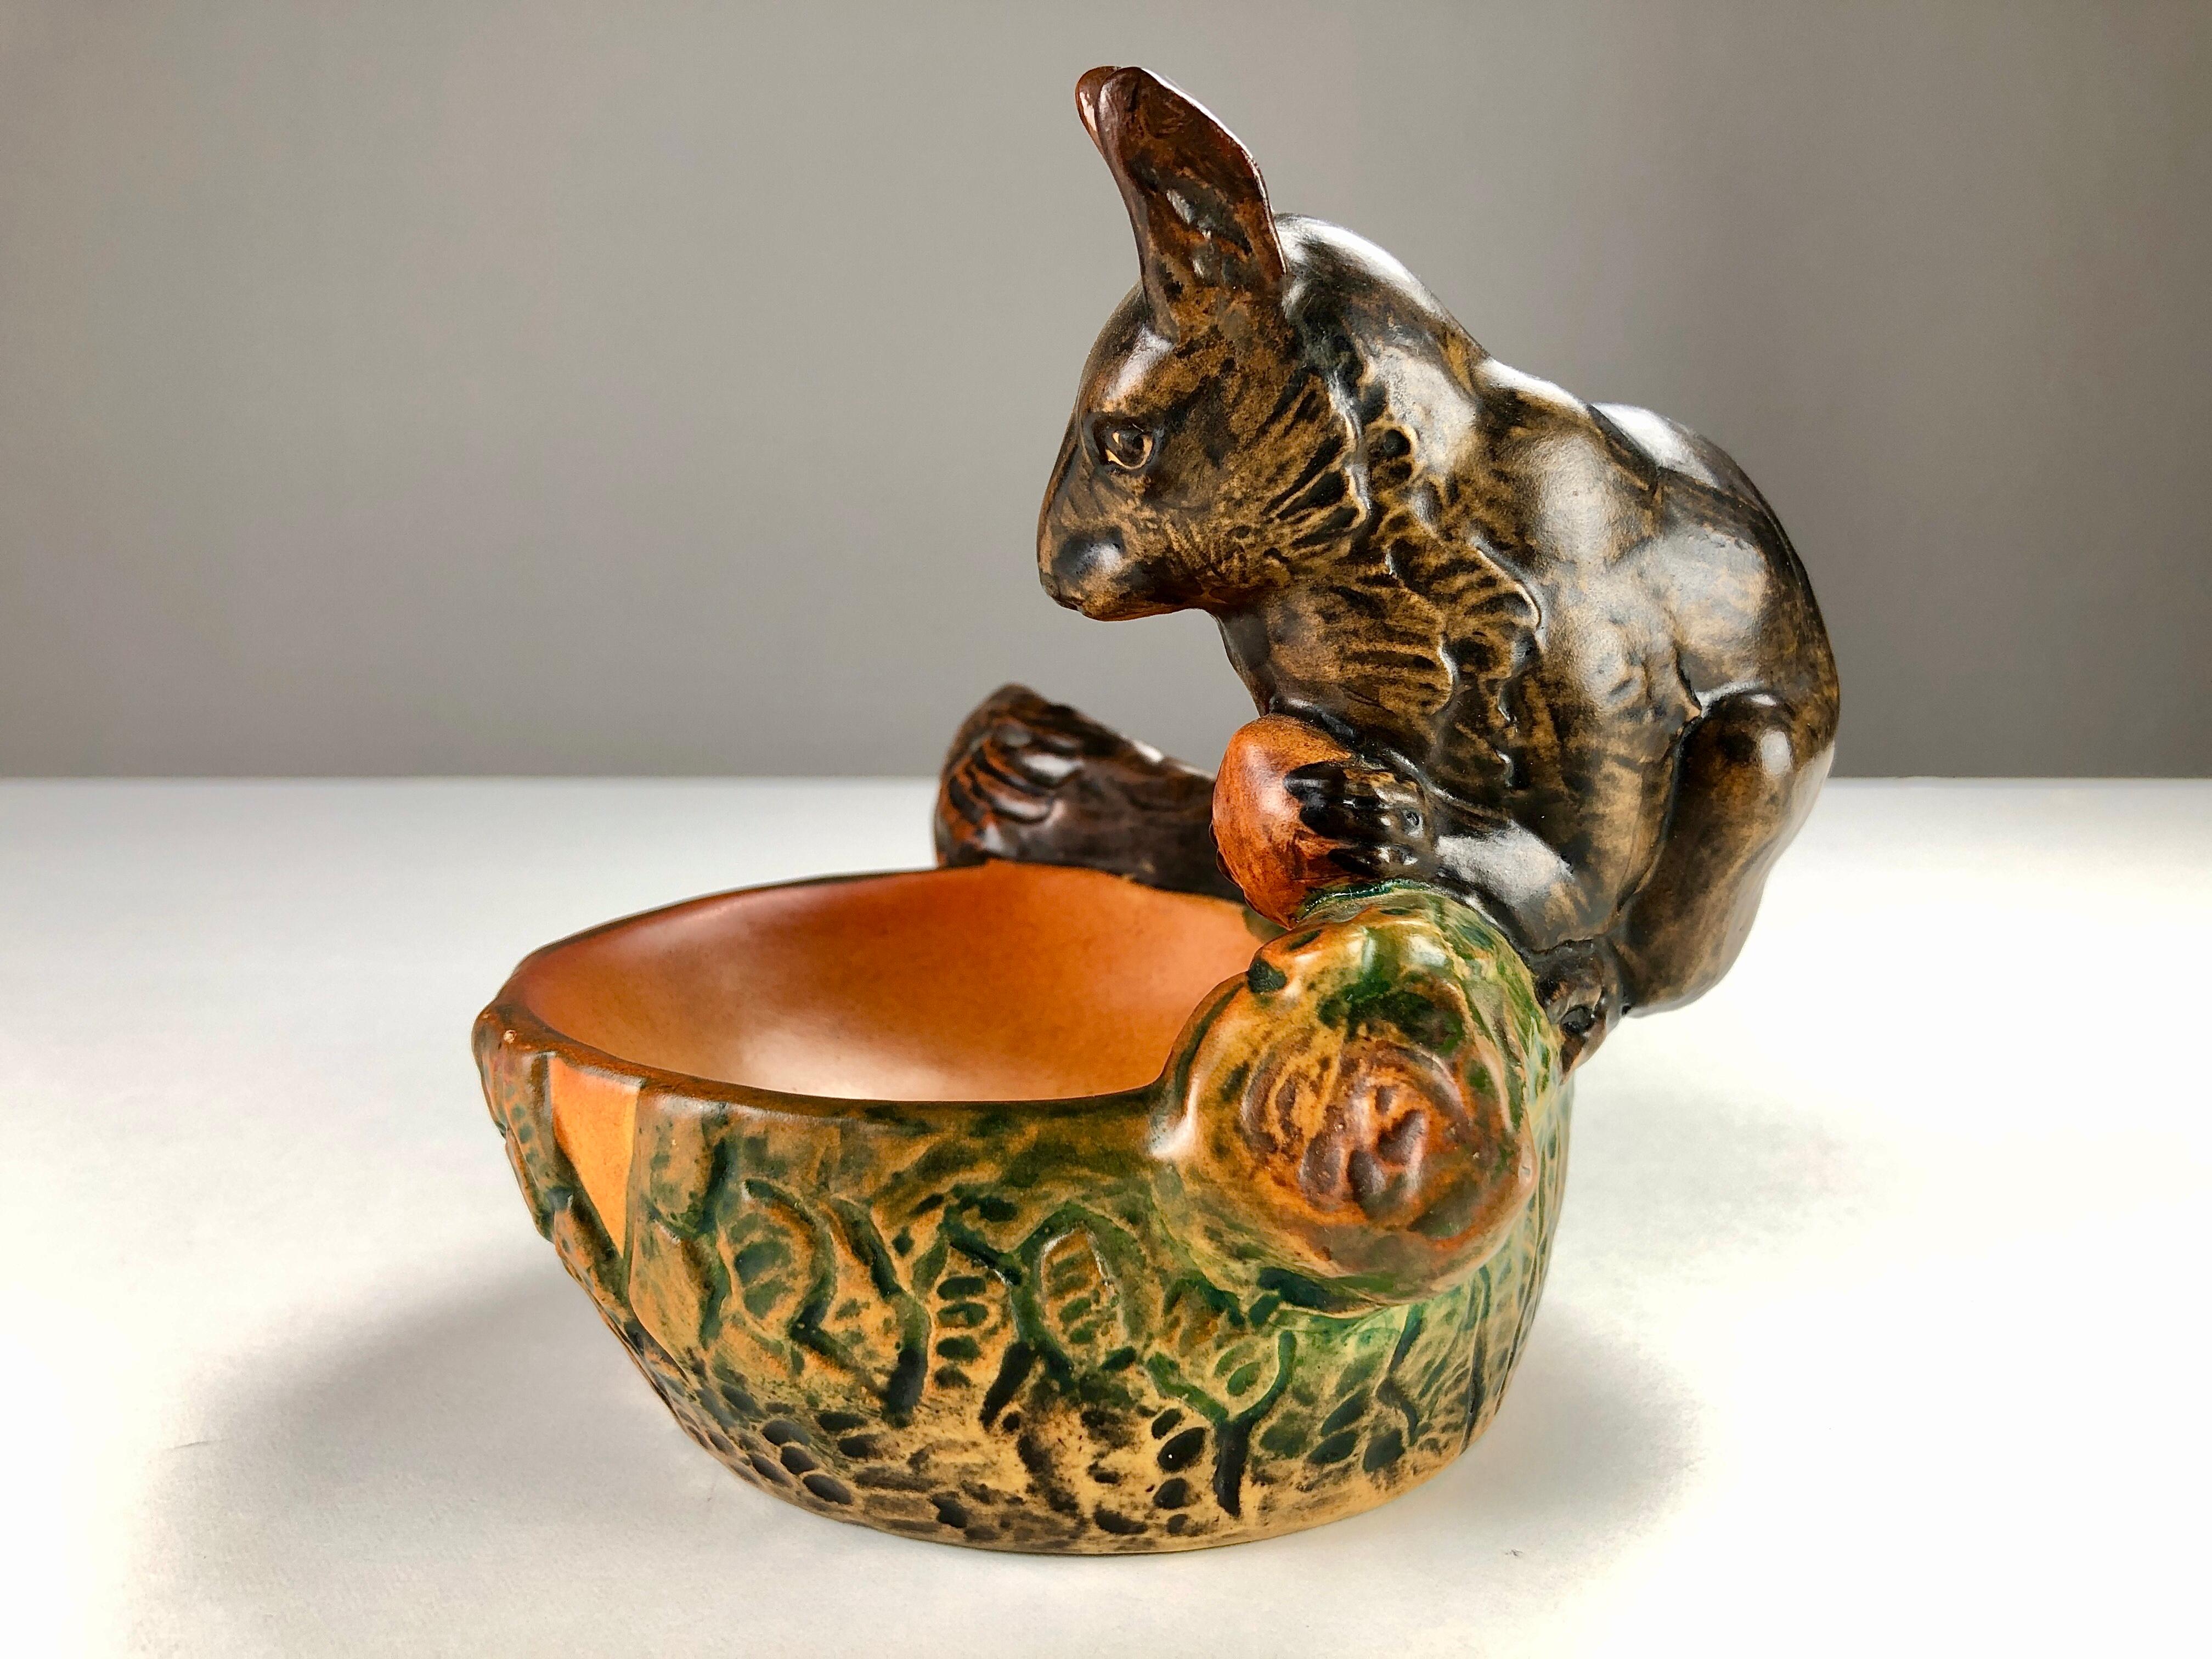 Early 20th Century 1920's Hand-Crafted Danish Art Nouveau Ash Tray / Bowl by P. Ipsens Enke For Sale